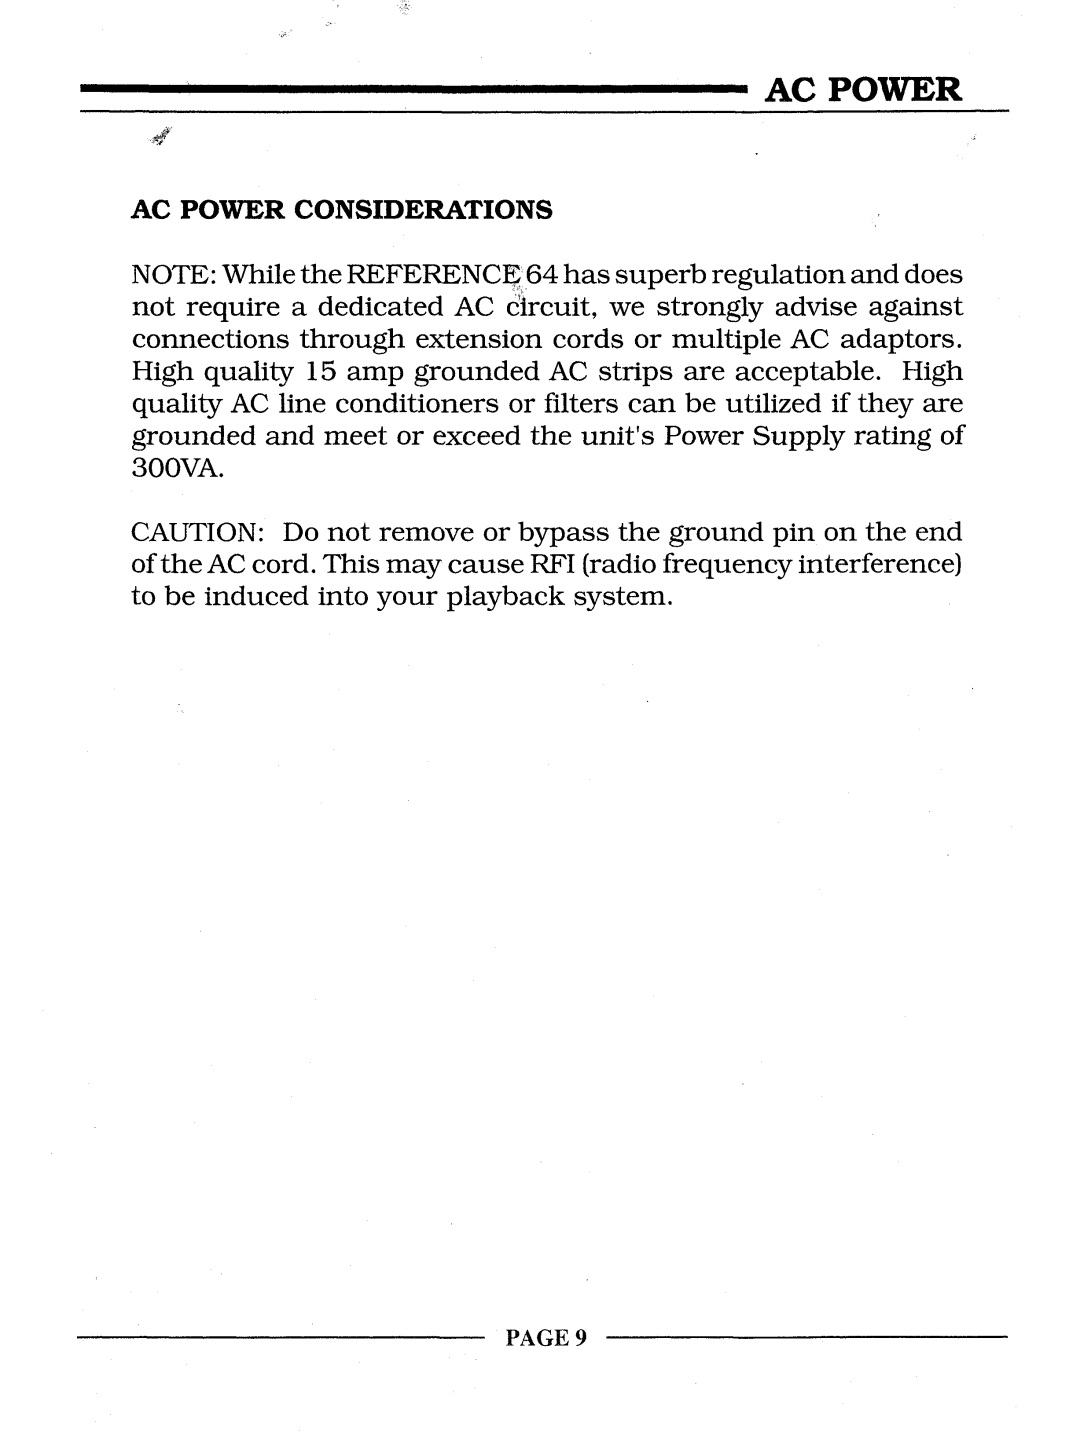 Krell Industries REFERENCE 64 manual Ac Power Considerations 